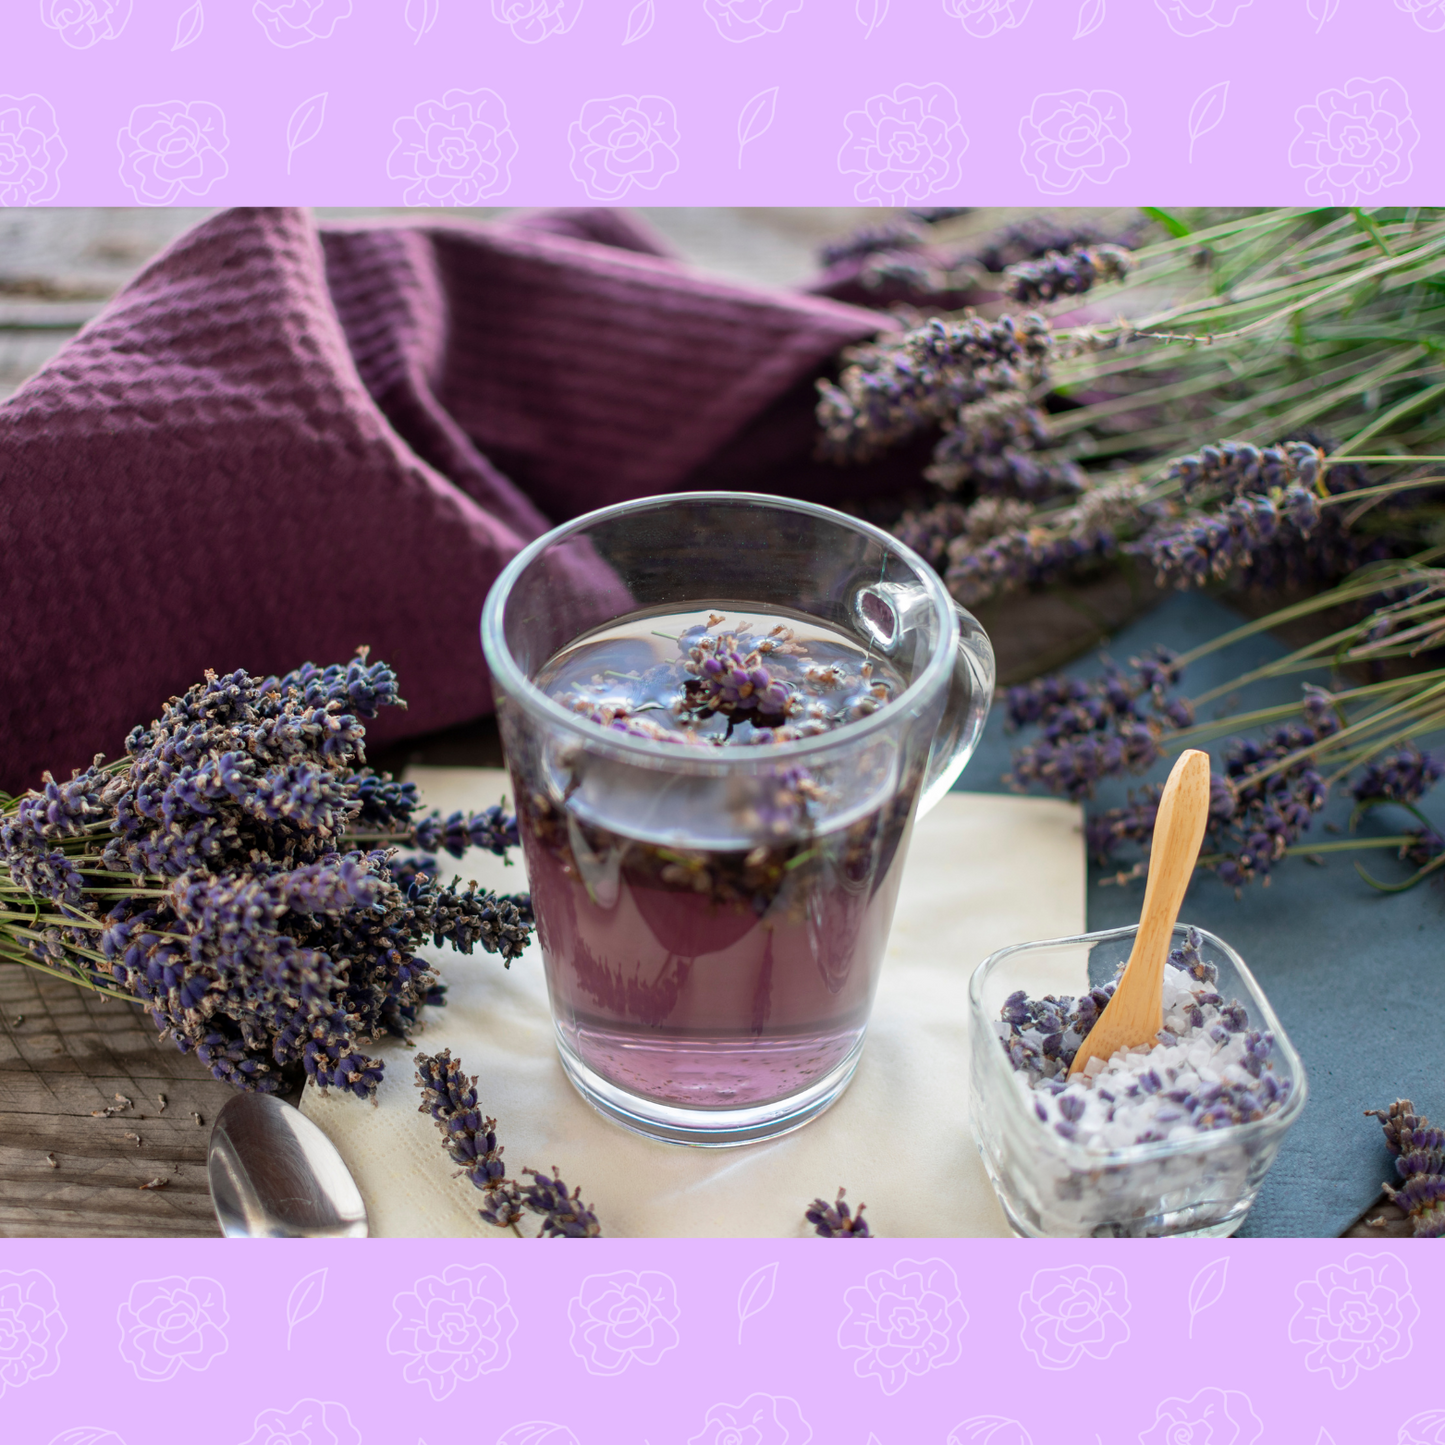 Witchy Pooh's Lavender Flowers for Simmer Pots, Cooking, Crafting, Tea, Relaxation and Sleep Aid